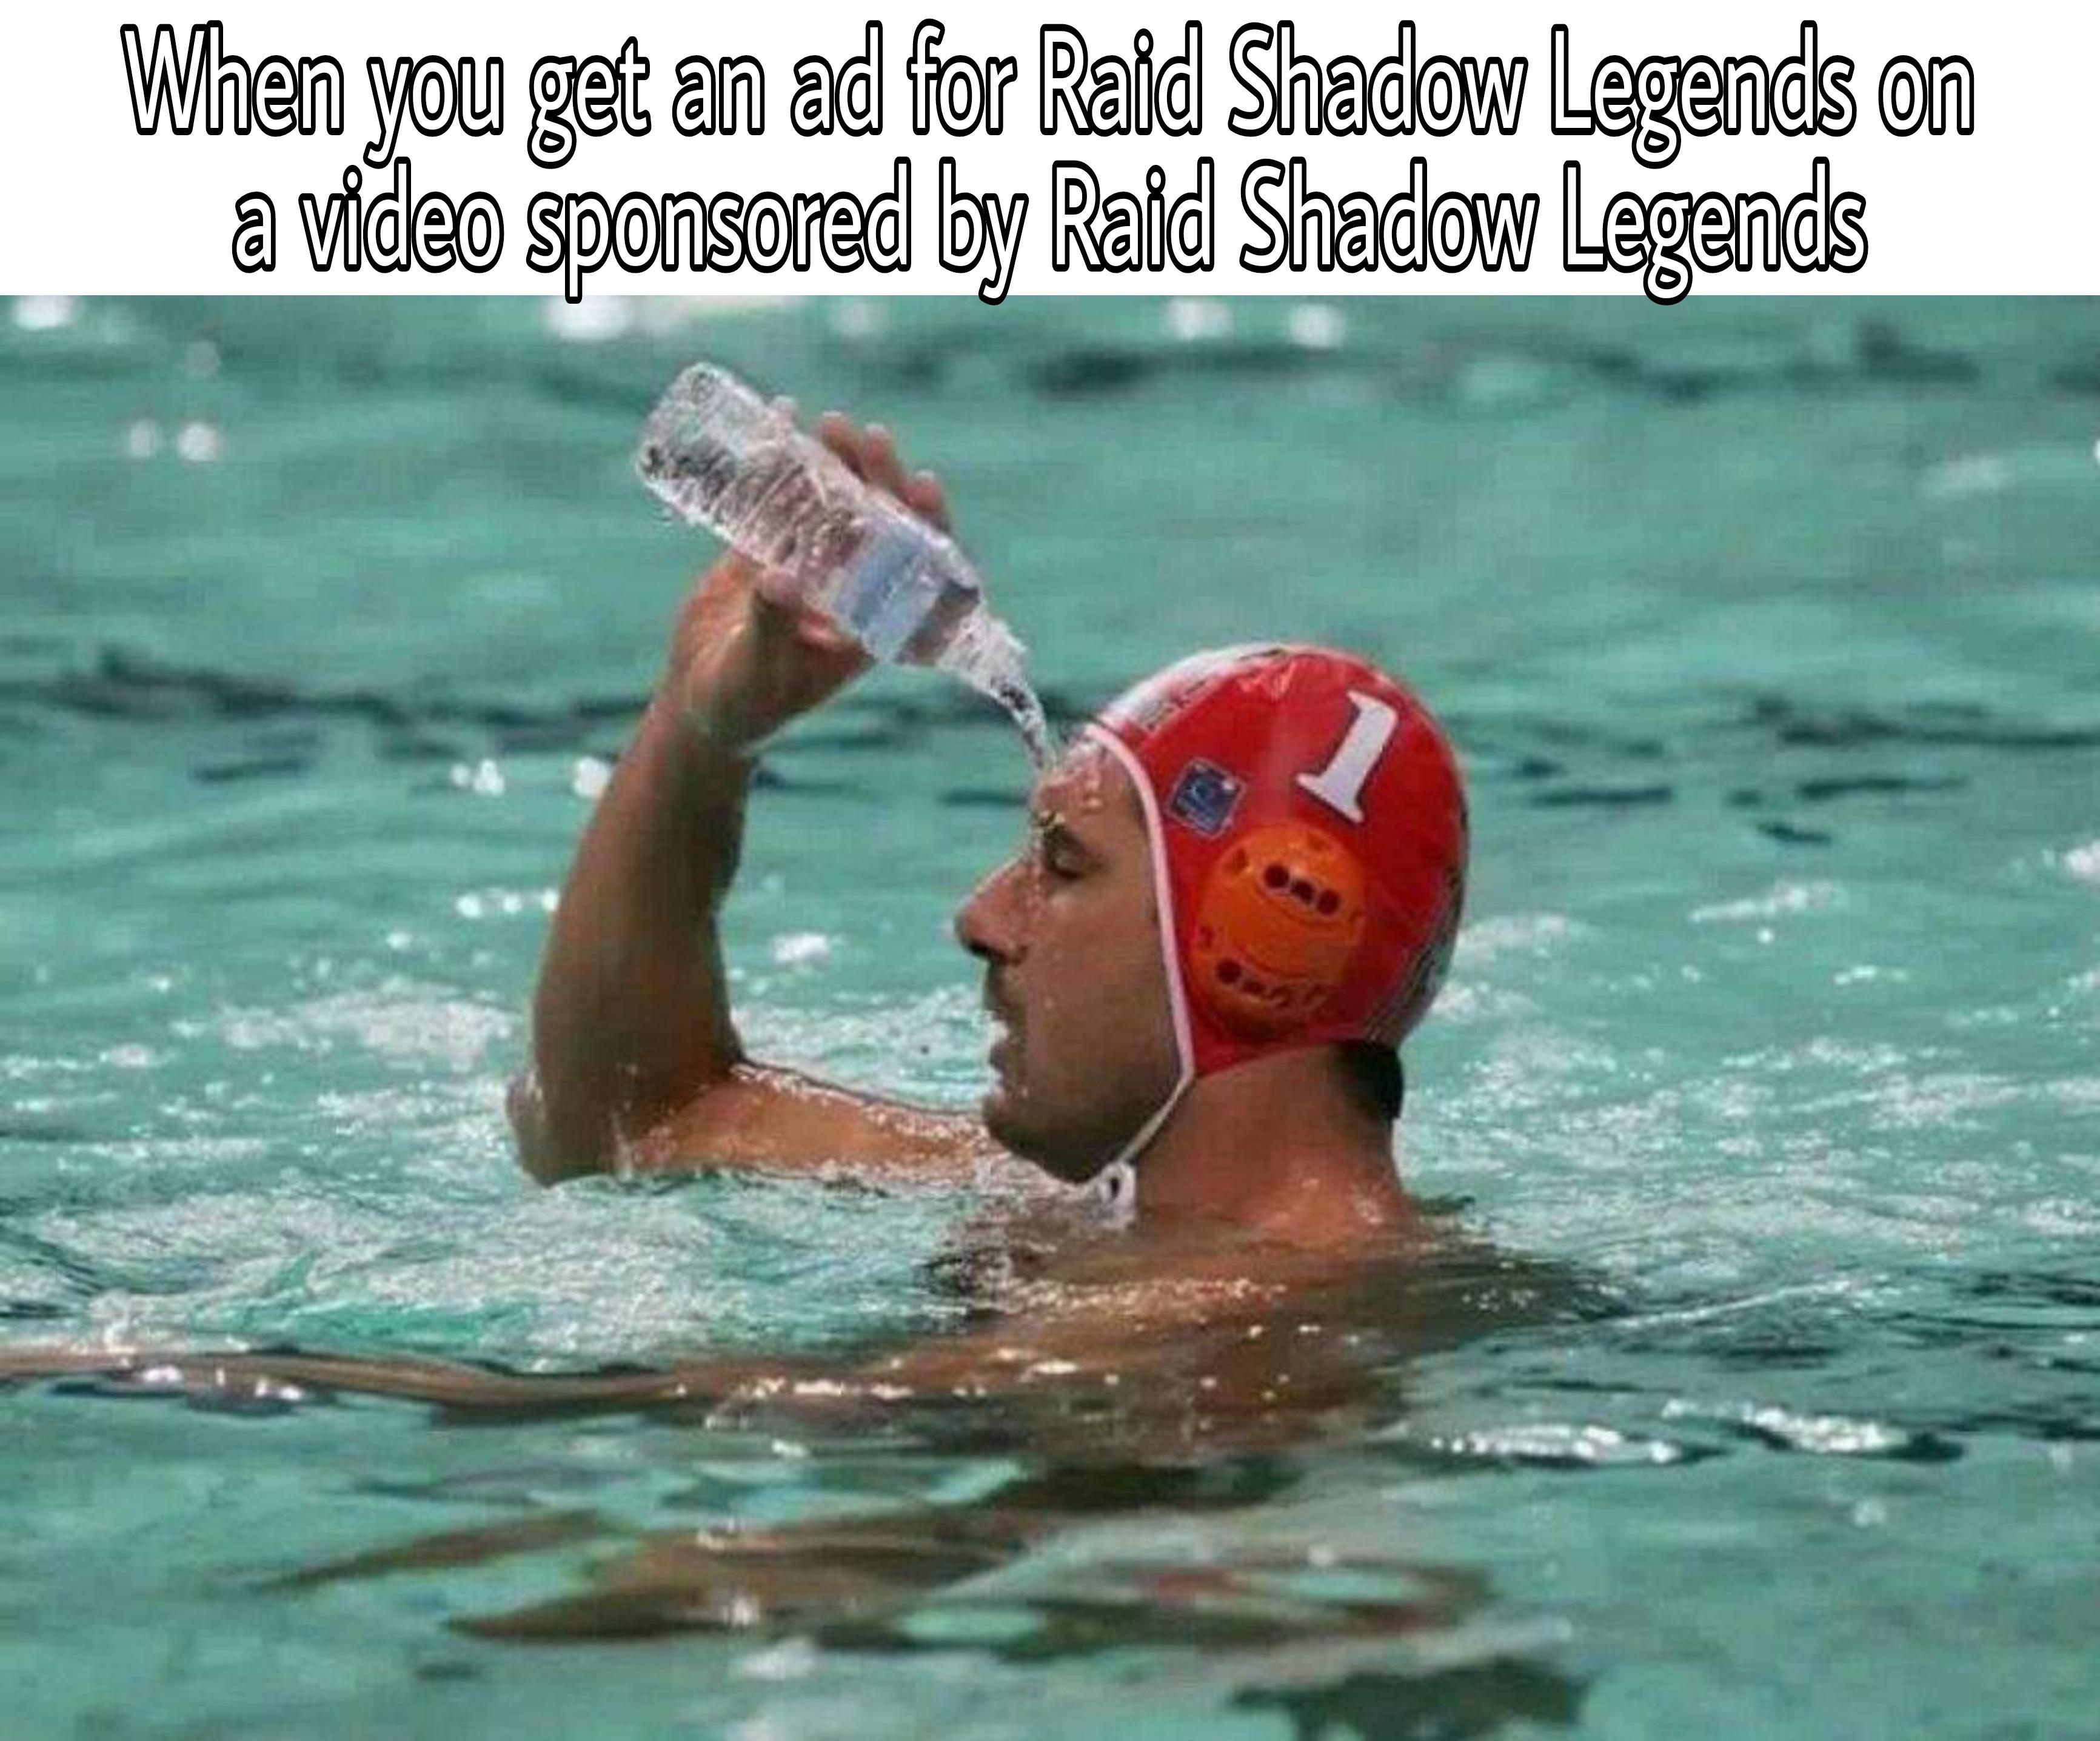 pouring water in pool - When you get an ad for Raid Shadow Legends on a video sponsored by Raid Shadow Legends